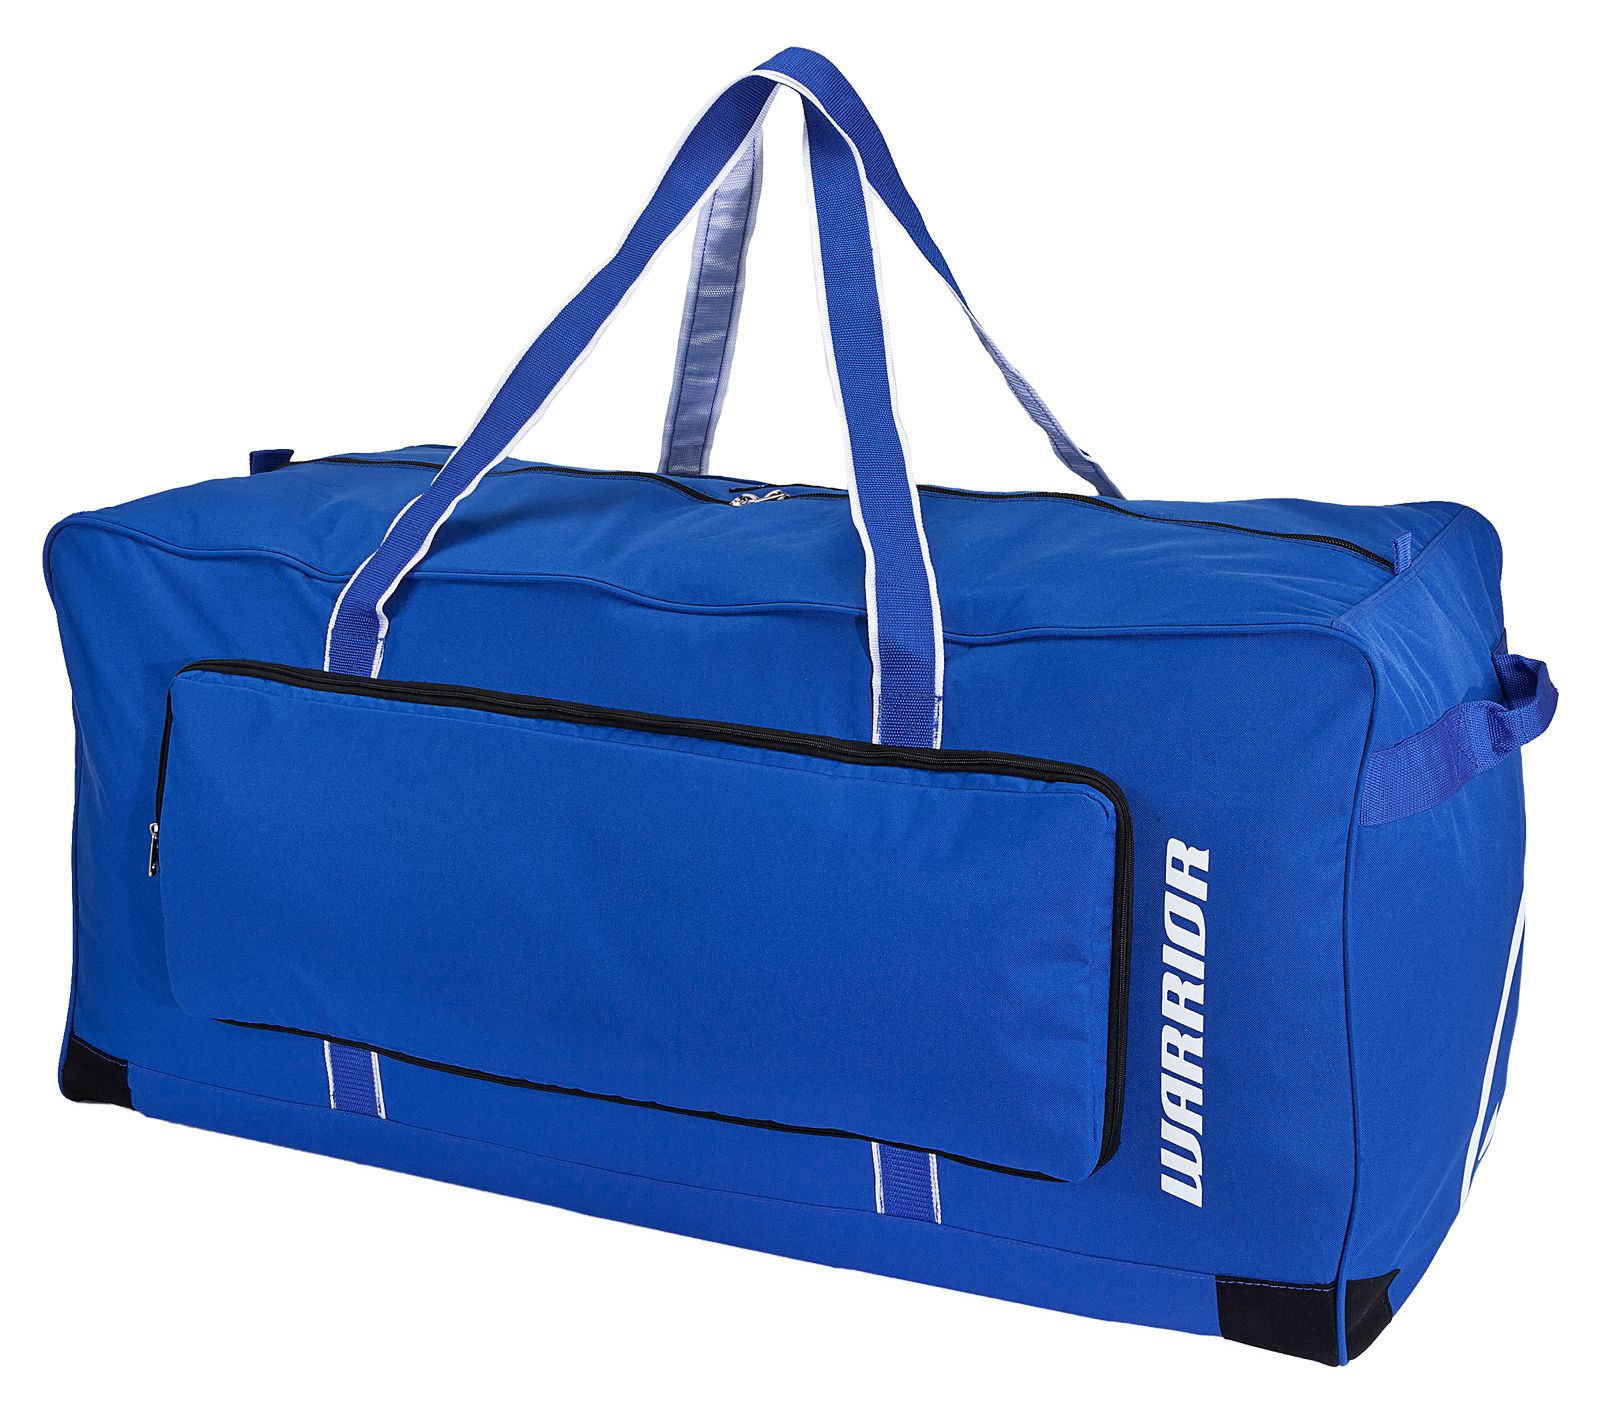 Team Goalie Duffel Bag, Royal Blue with White image number 1